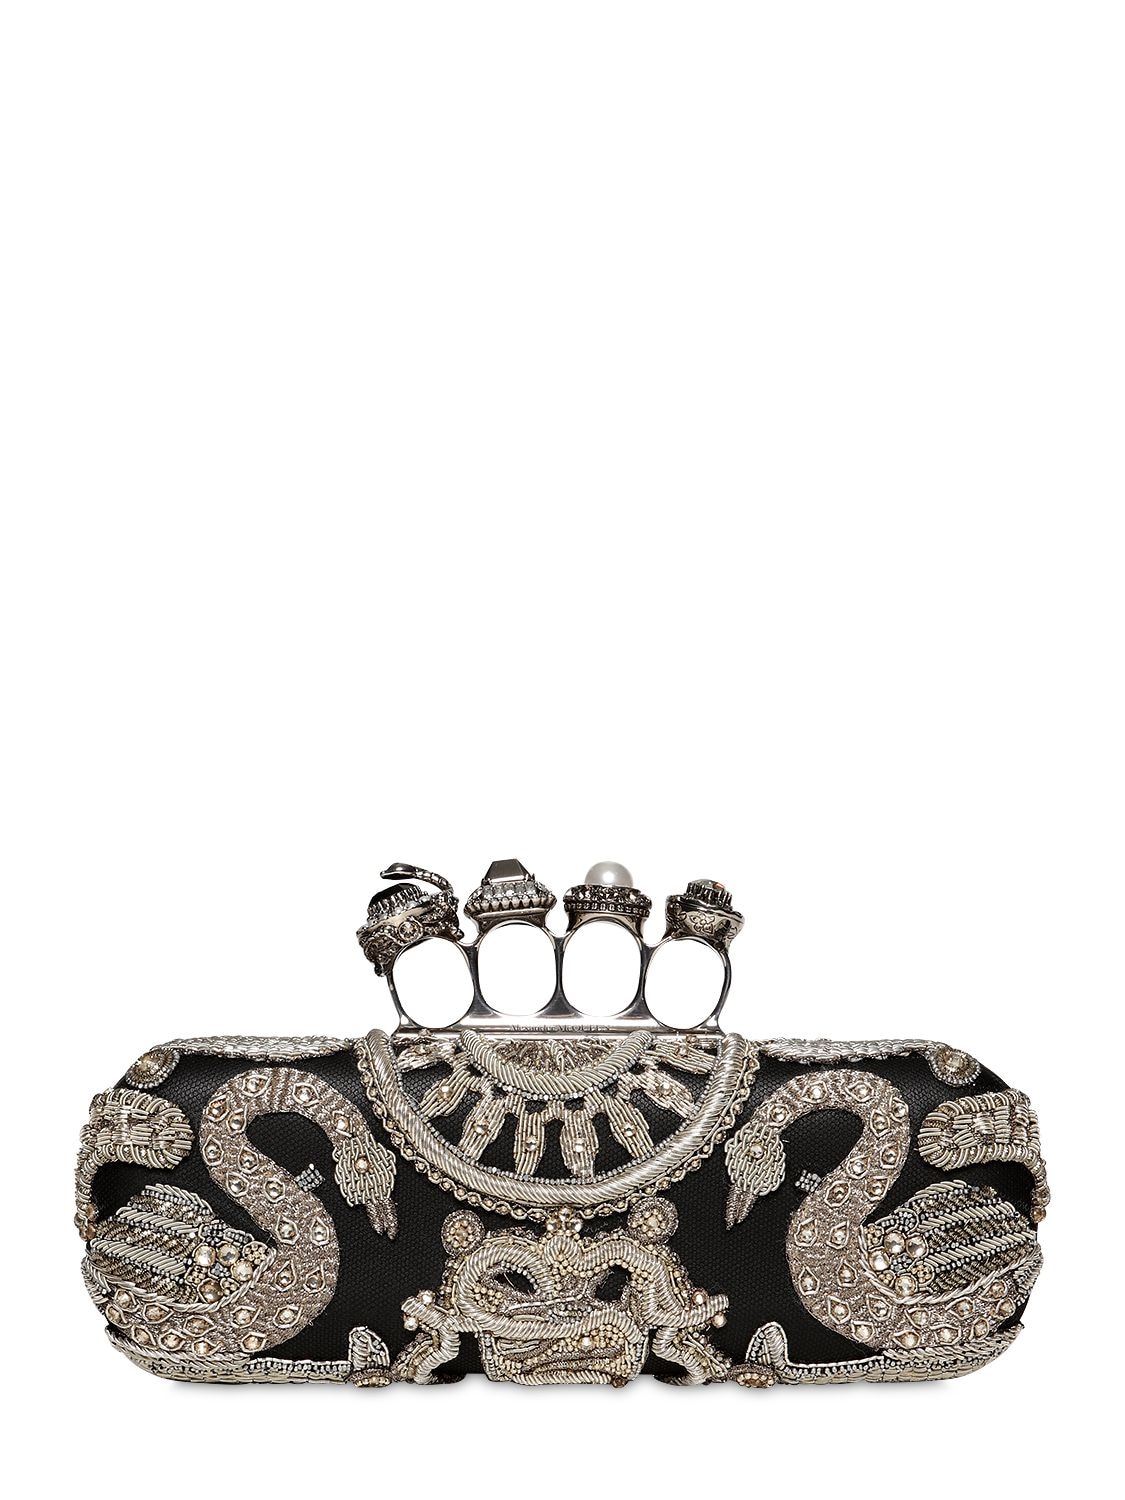 ALEXANDER MCQUEEN EMBELLISHED LEATHER KNUCKLE RING CLUTCH,69IRL6014-ODQ5MA2